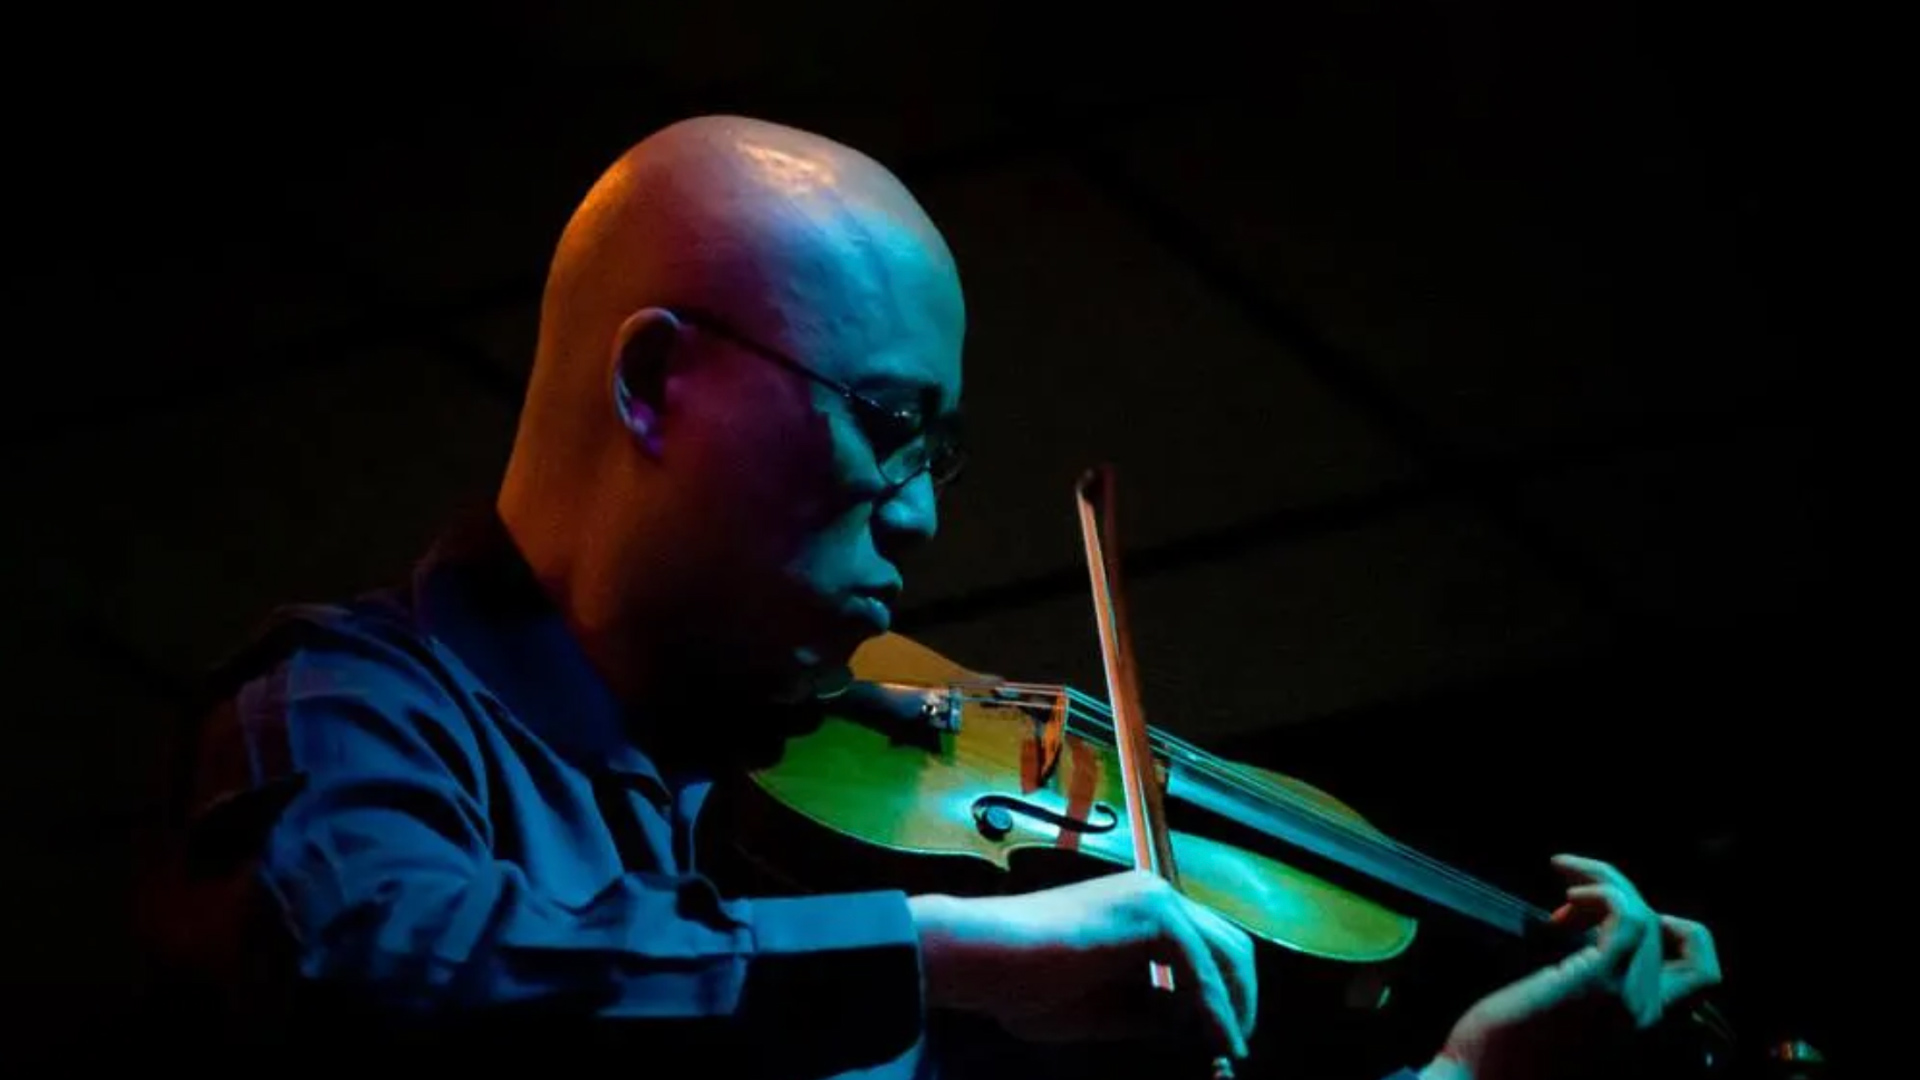 close-up of man playing the violin under blue ambient lighting